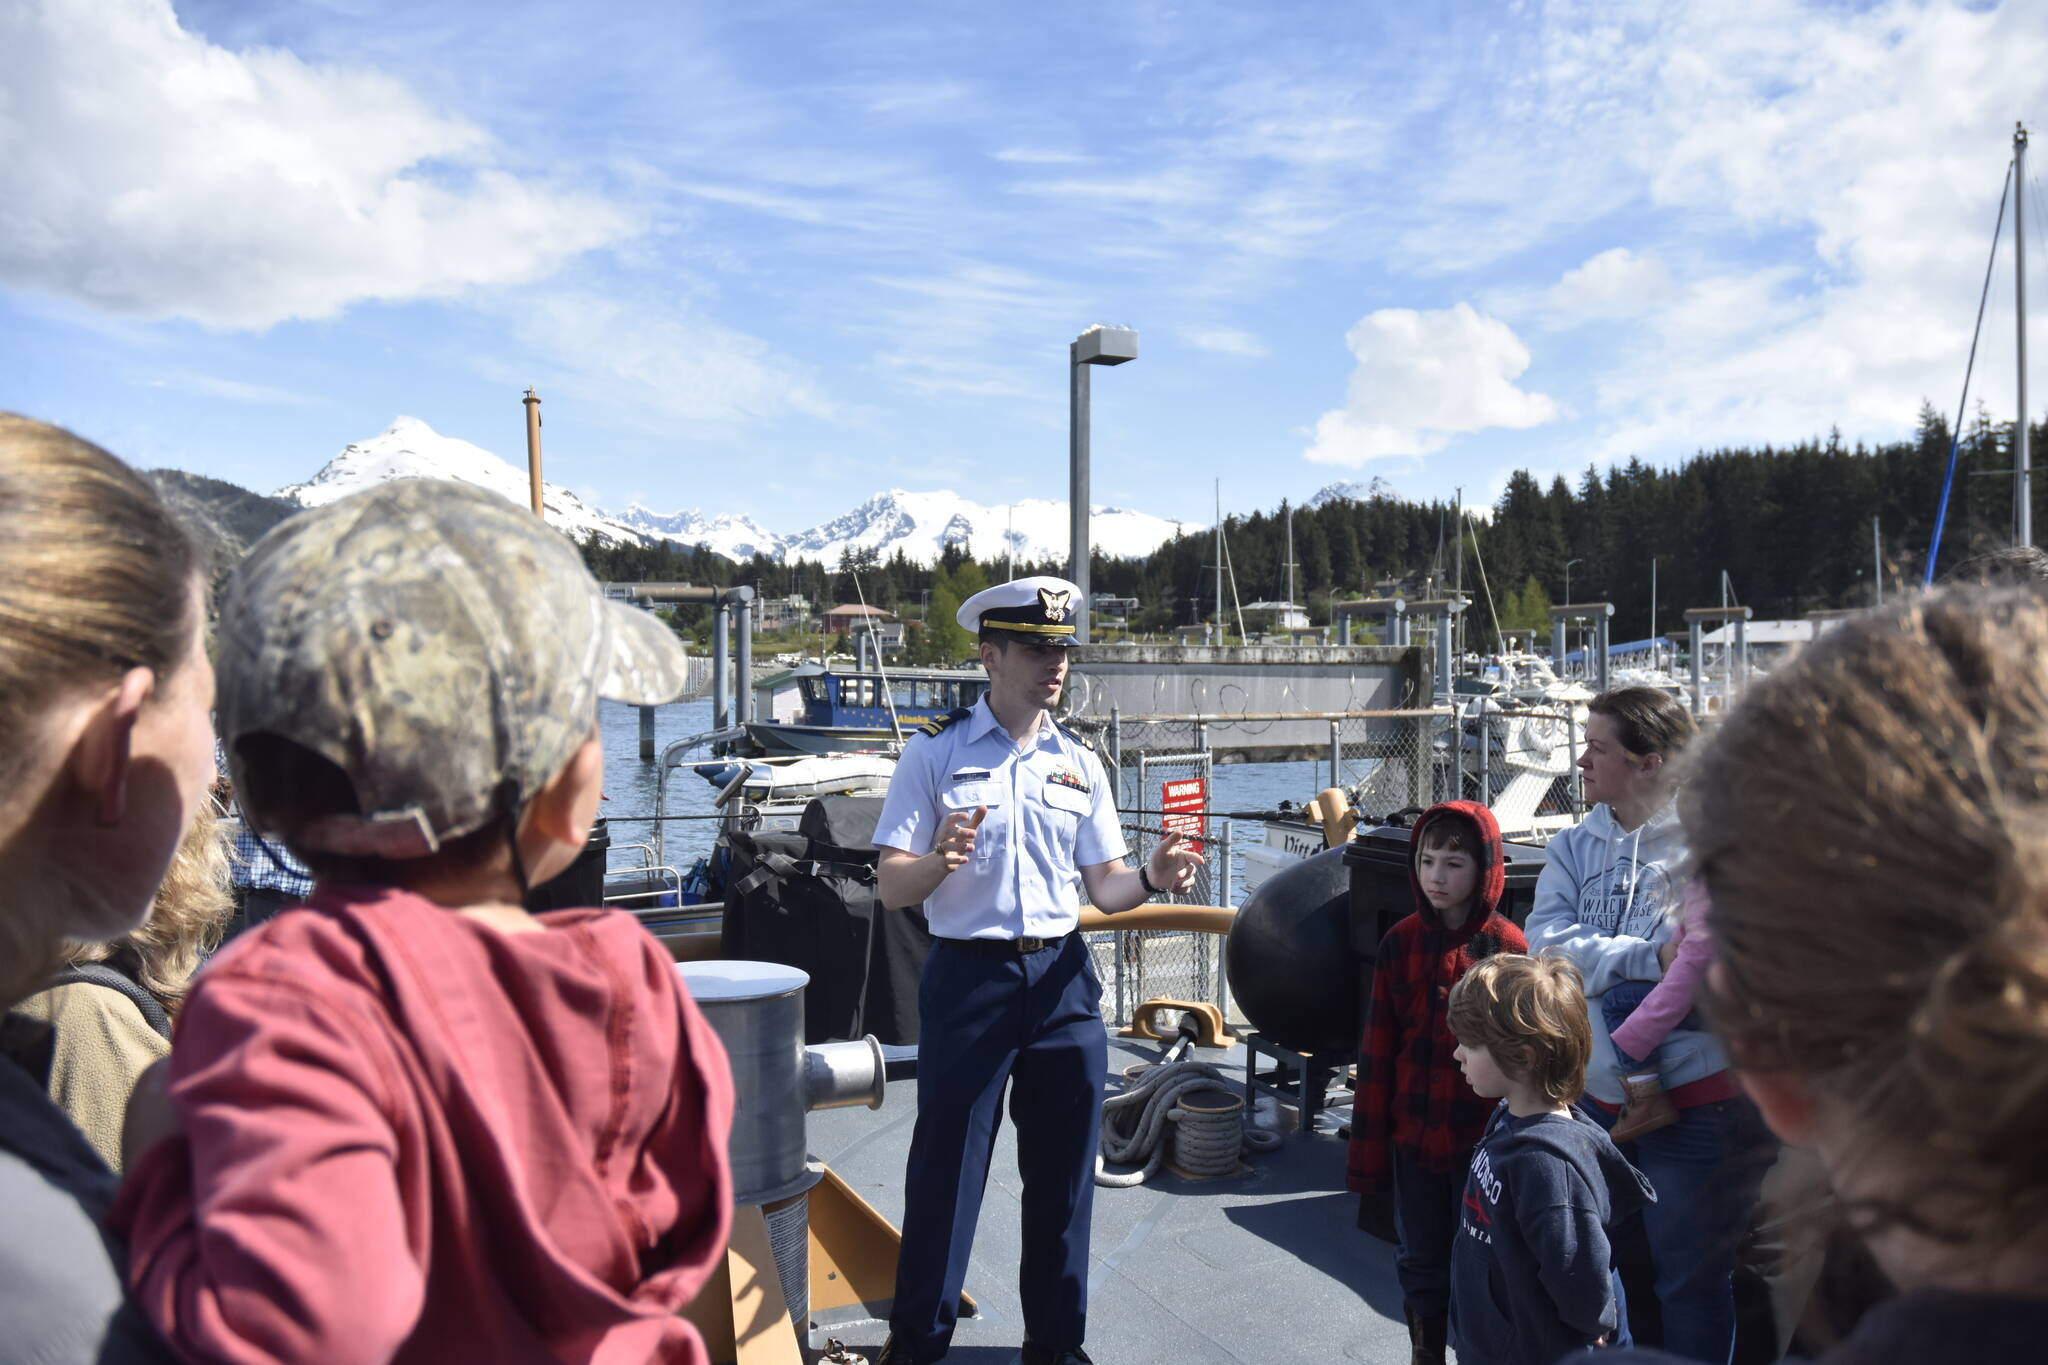 On the deck of the U.S. Coast Guard cutter Liberty, Lt. j.g. Quinn Levy gives visitors a history of the vessel to guests on Thursday, May 26, 2022. The Liberty has been stationed in Juneau for more than 30 years but is being re-homeported in Valdez. (Peter Segall / Juneau Empire)